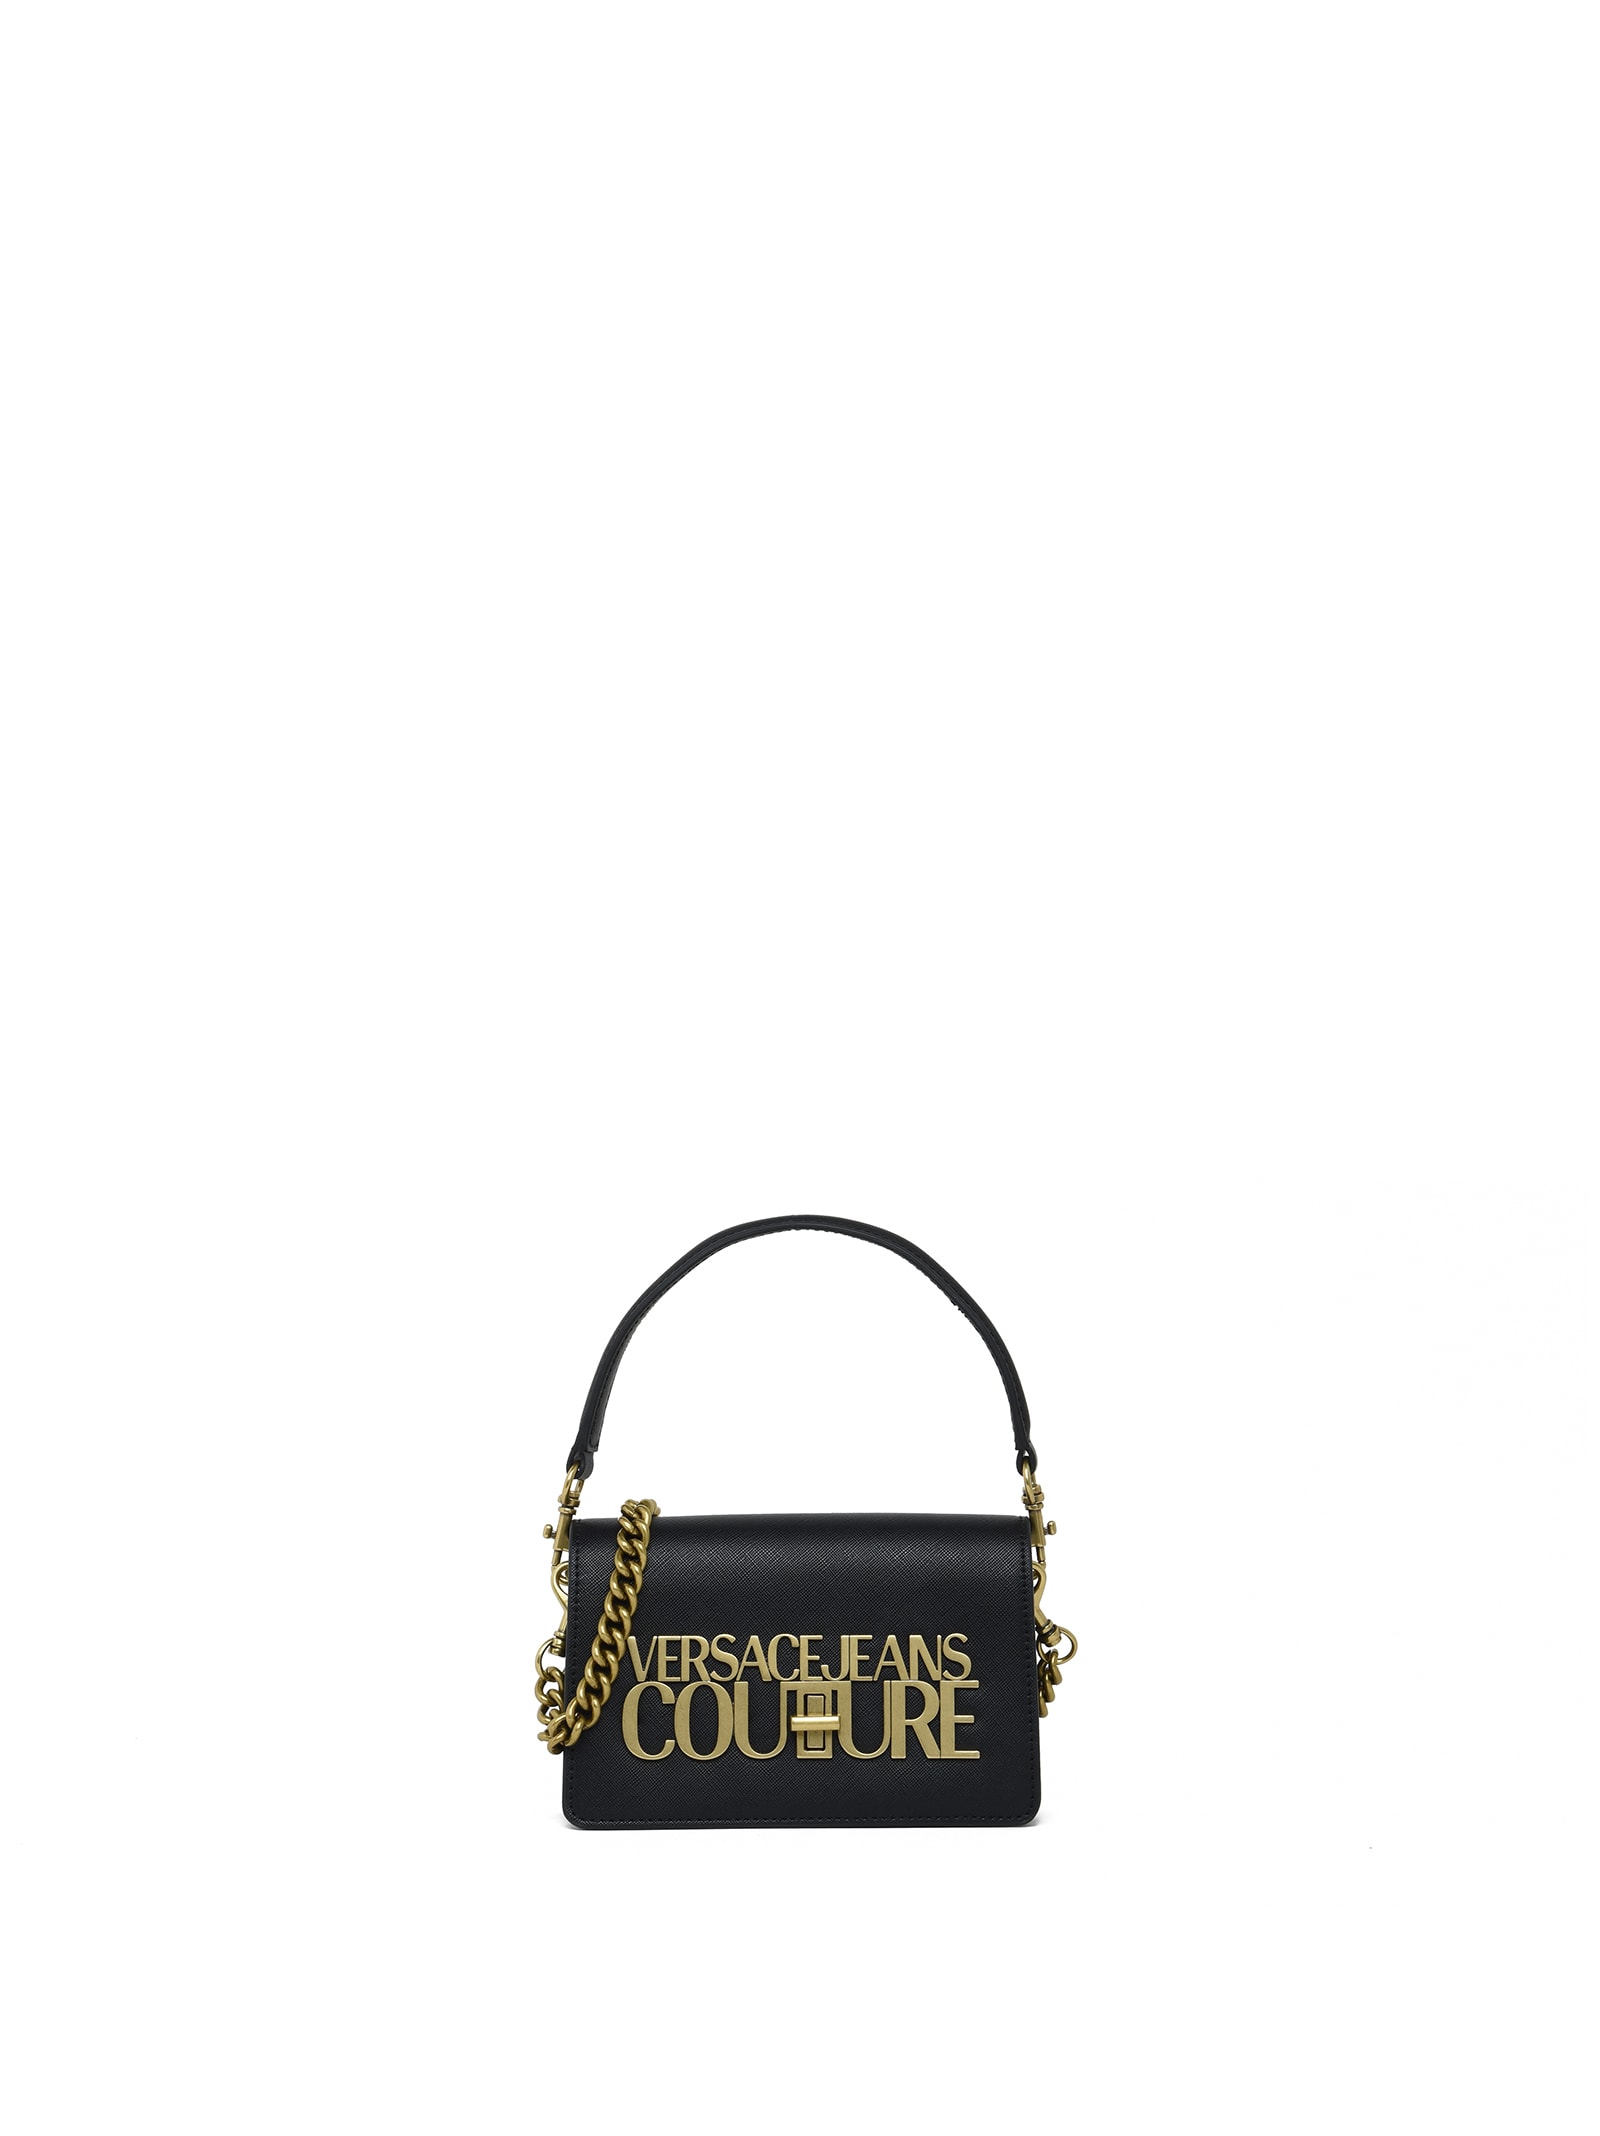 versace jeans couture leatherette handbag with chain strap